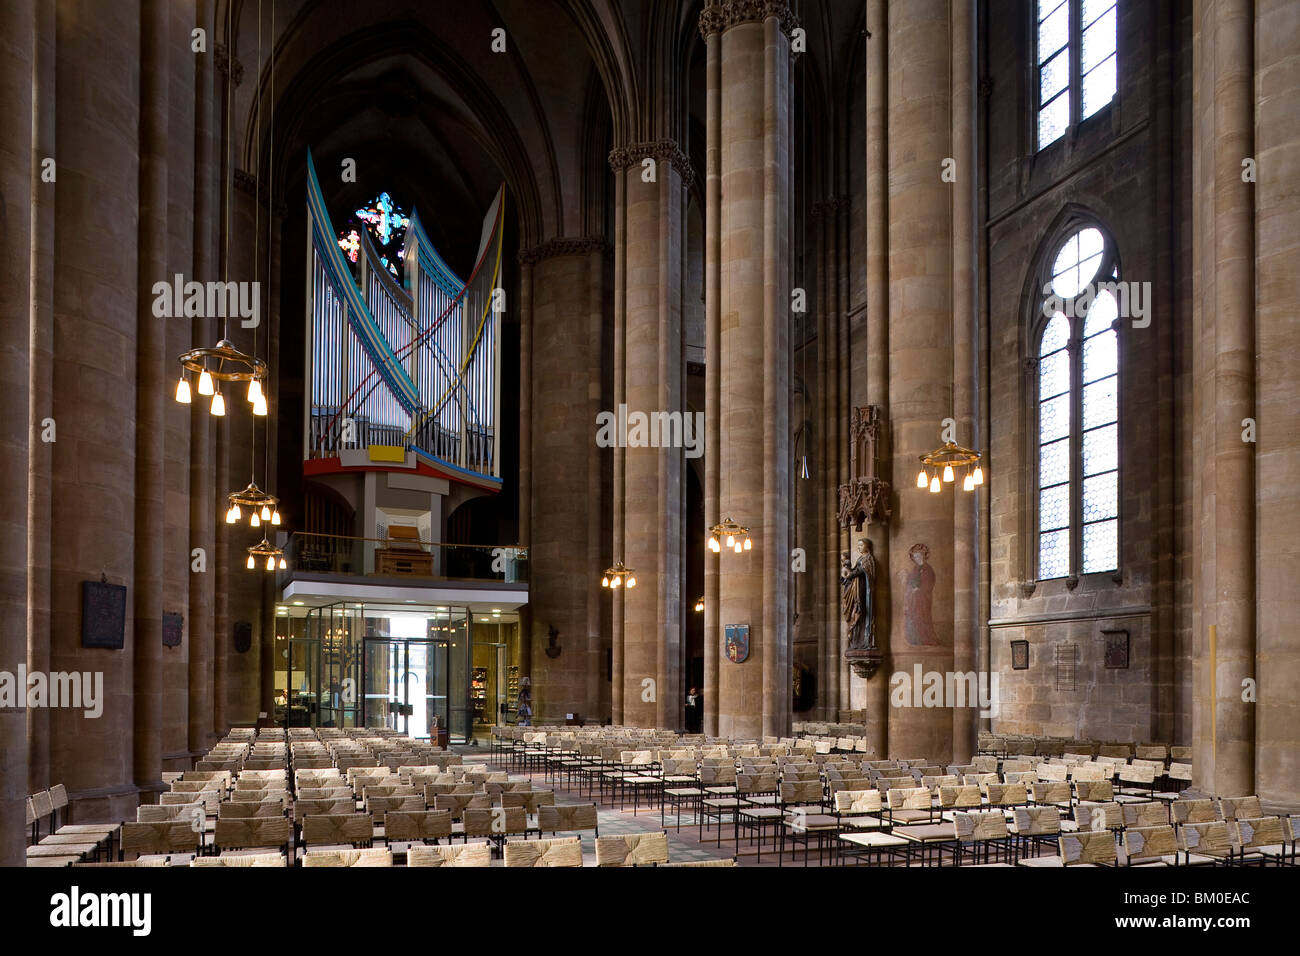 Interior view of the Elisabeth church in Marburg, Hesse, Germany, Europe Stock Photo